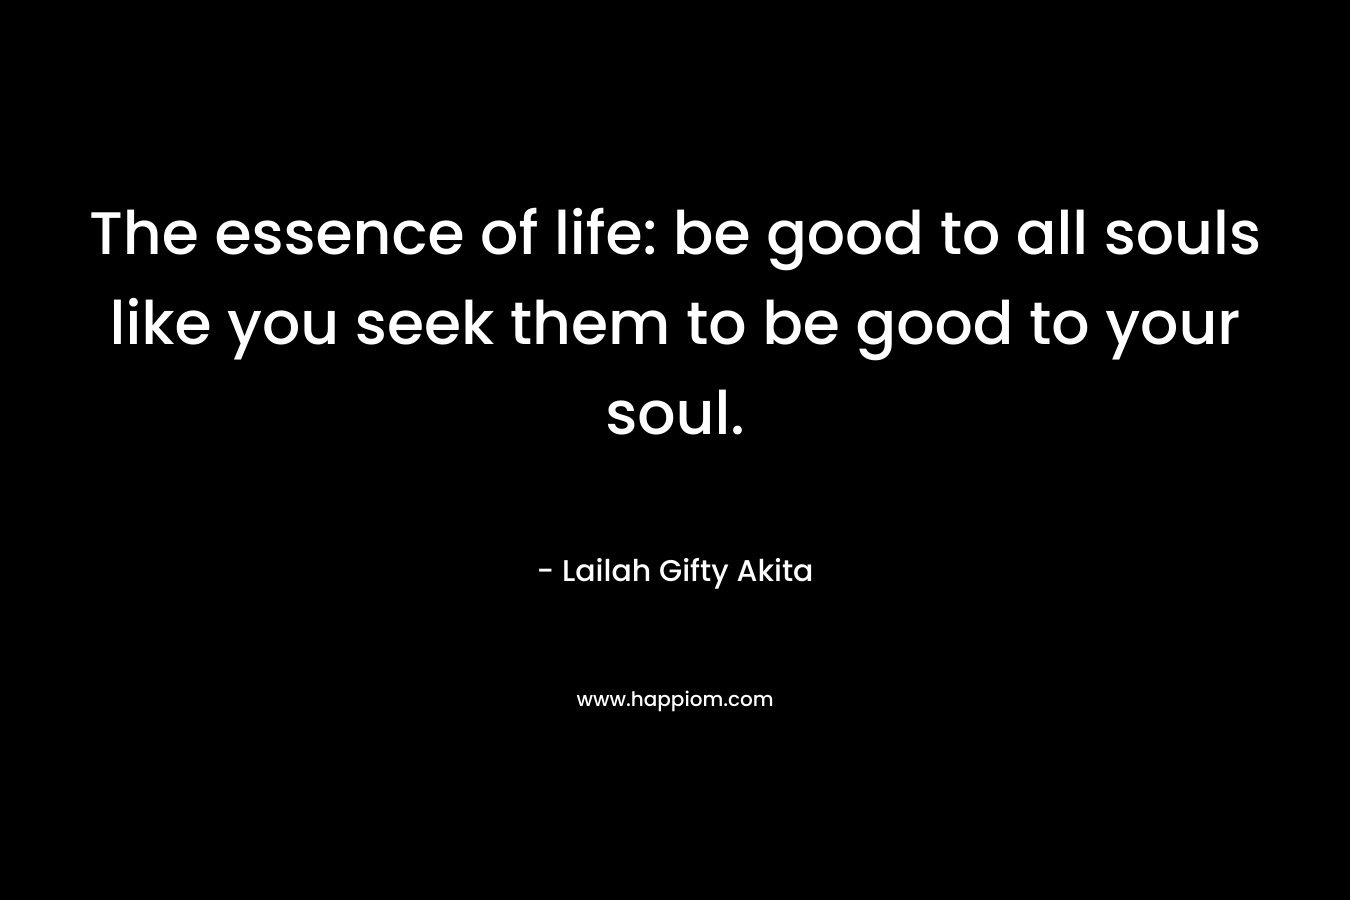 The essence of life: be good to all souls like you seek them to be good to your soul.